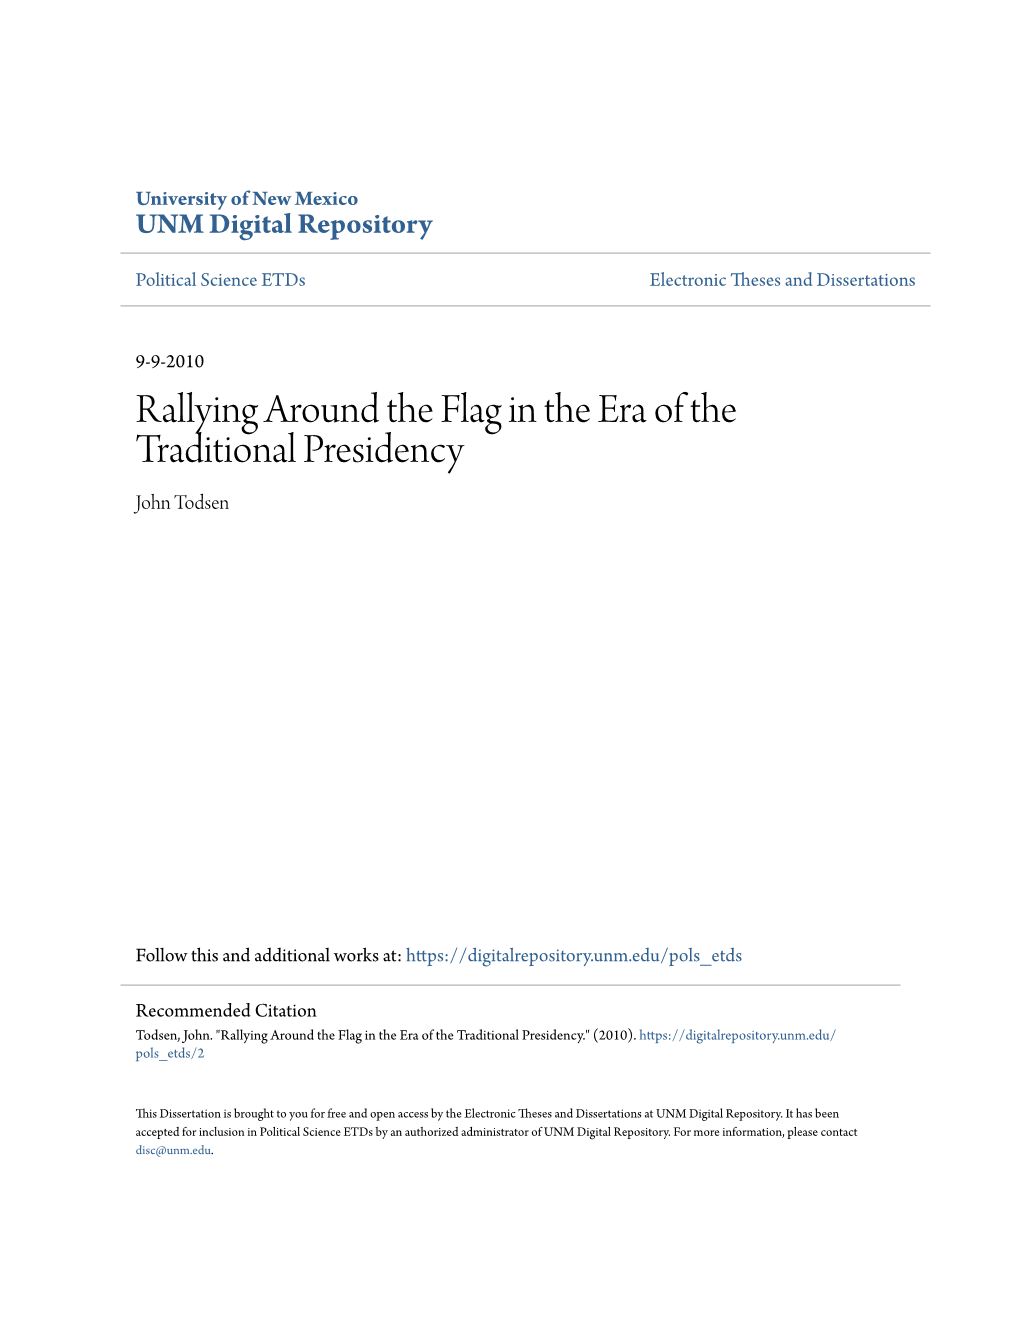 Rallying Around the Flag in the Era of the Traditional Presidency John Todsen